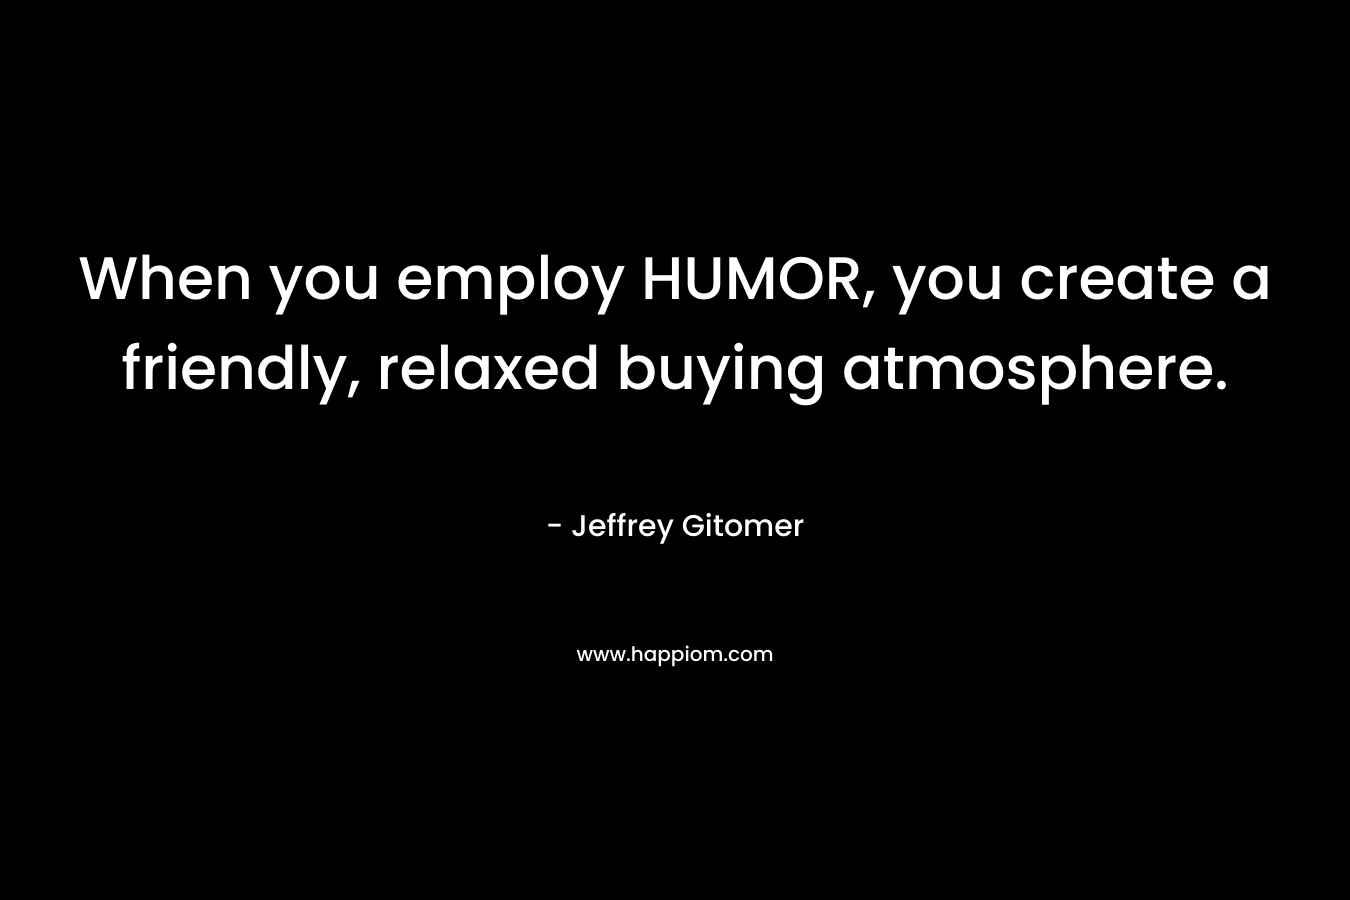 When you employ HUMOR, you create a friendly, relaxed buying atmosphere.